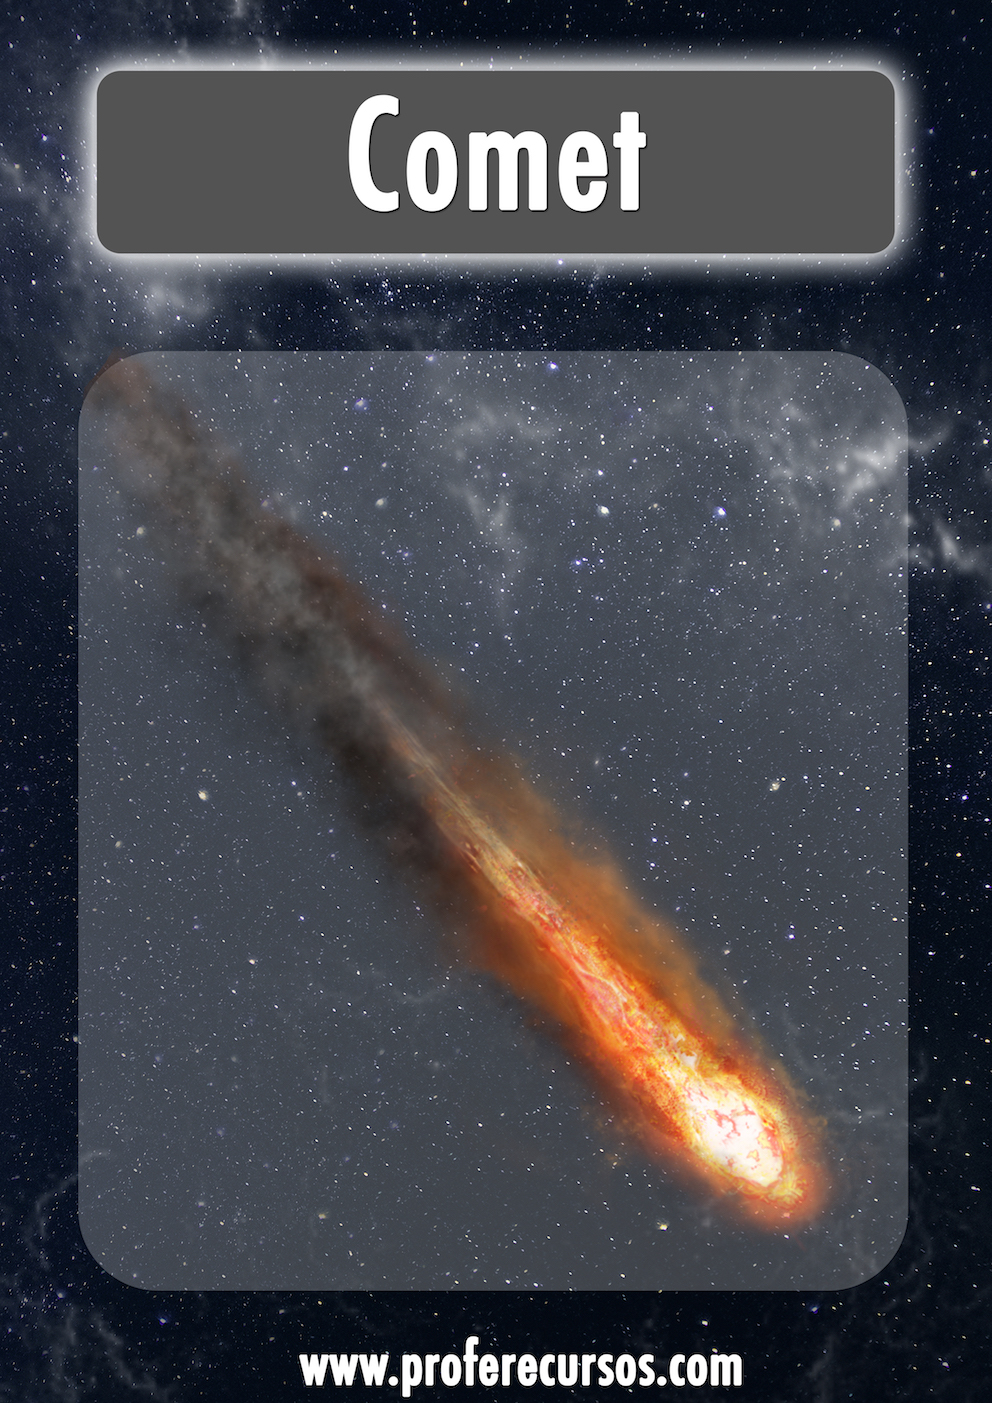 Comet Space Vocabulary Flashcards